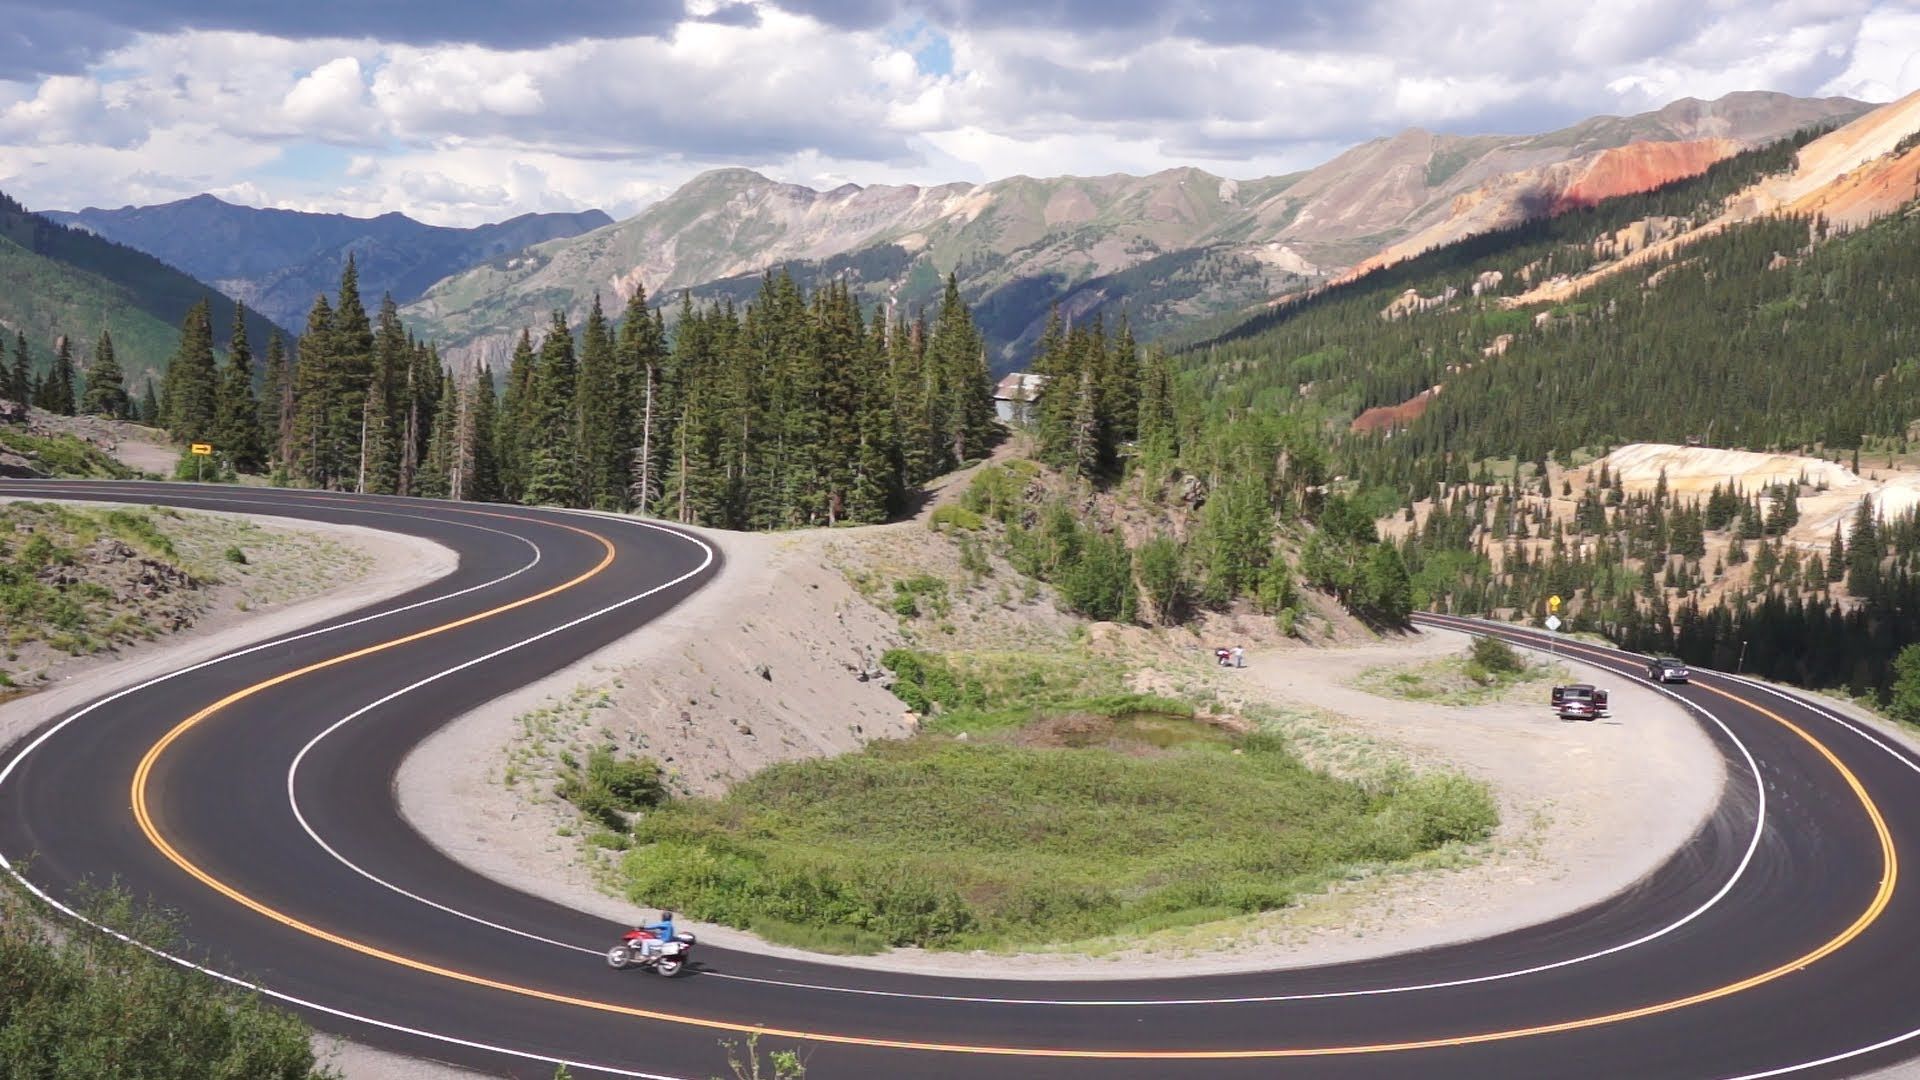 Fantastic curves and scenery for a motorcycle  ride along the Million Dollar Highway